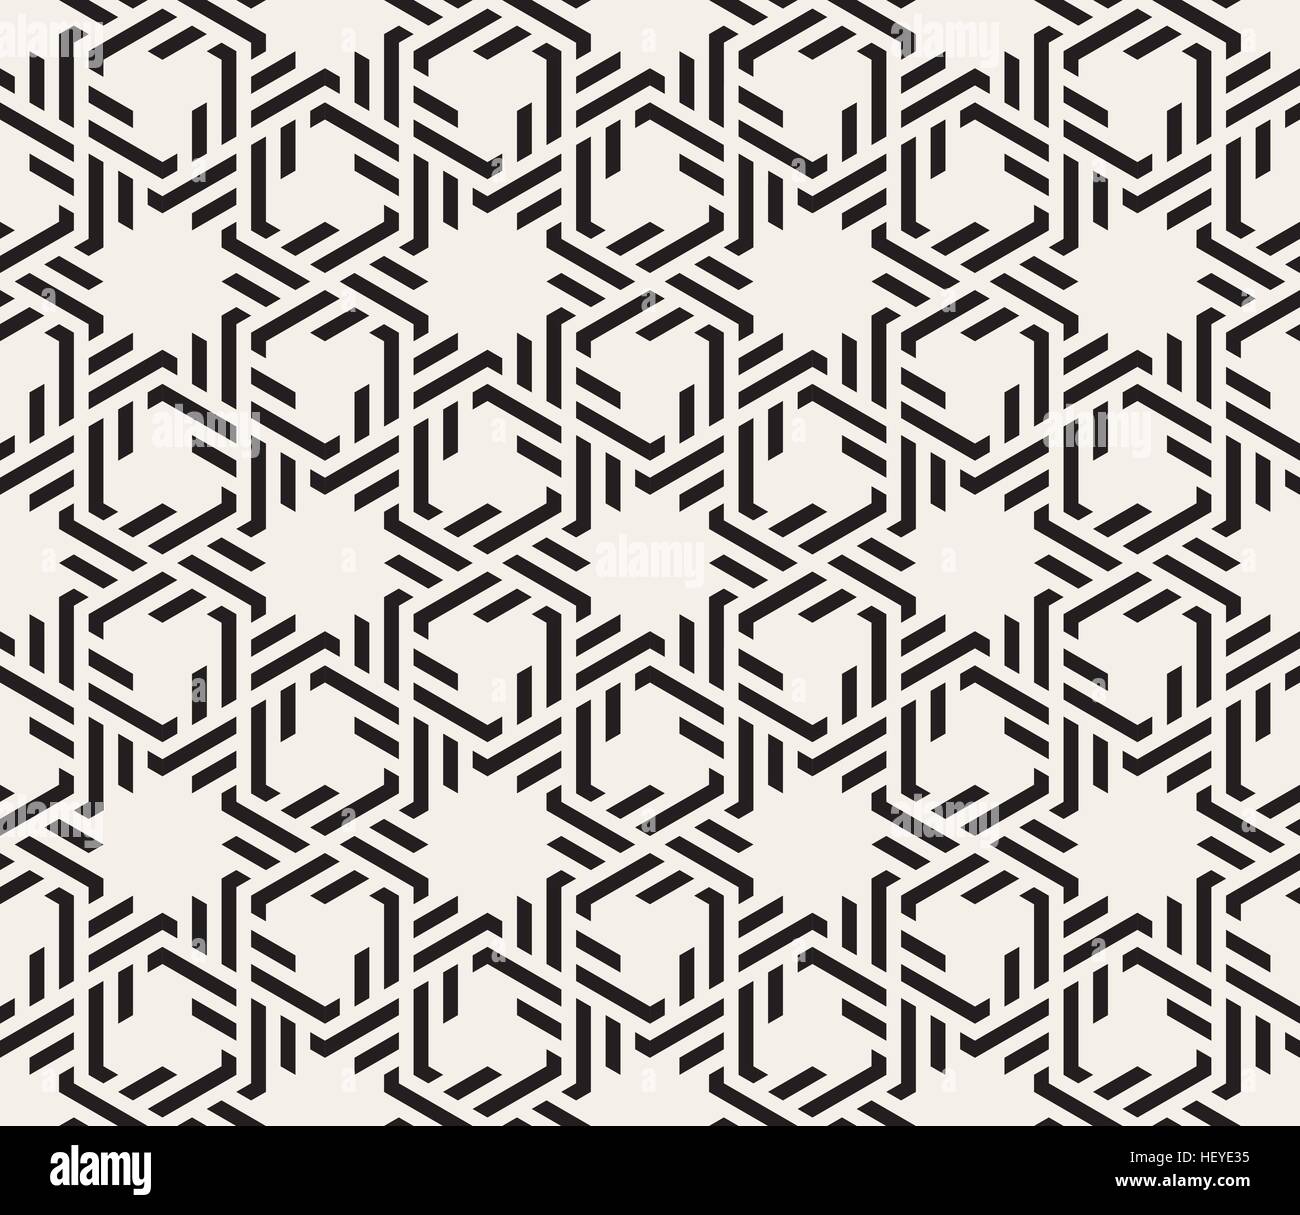 Vector Seamless Black And White Interlacing Lines Geometric Islamic Pattern Background Stock Vector